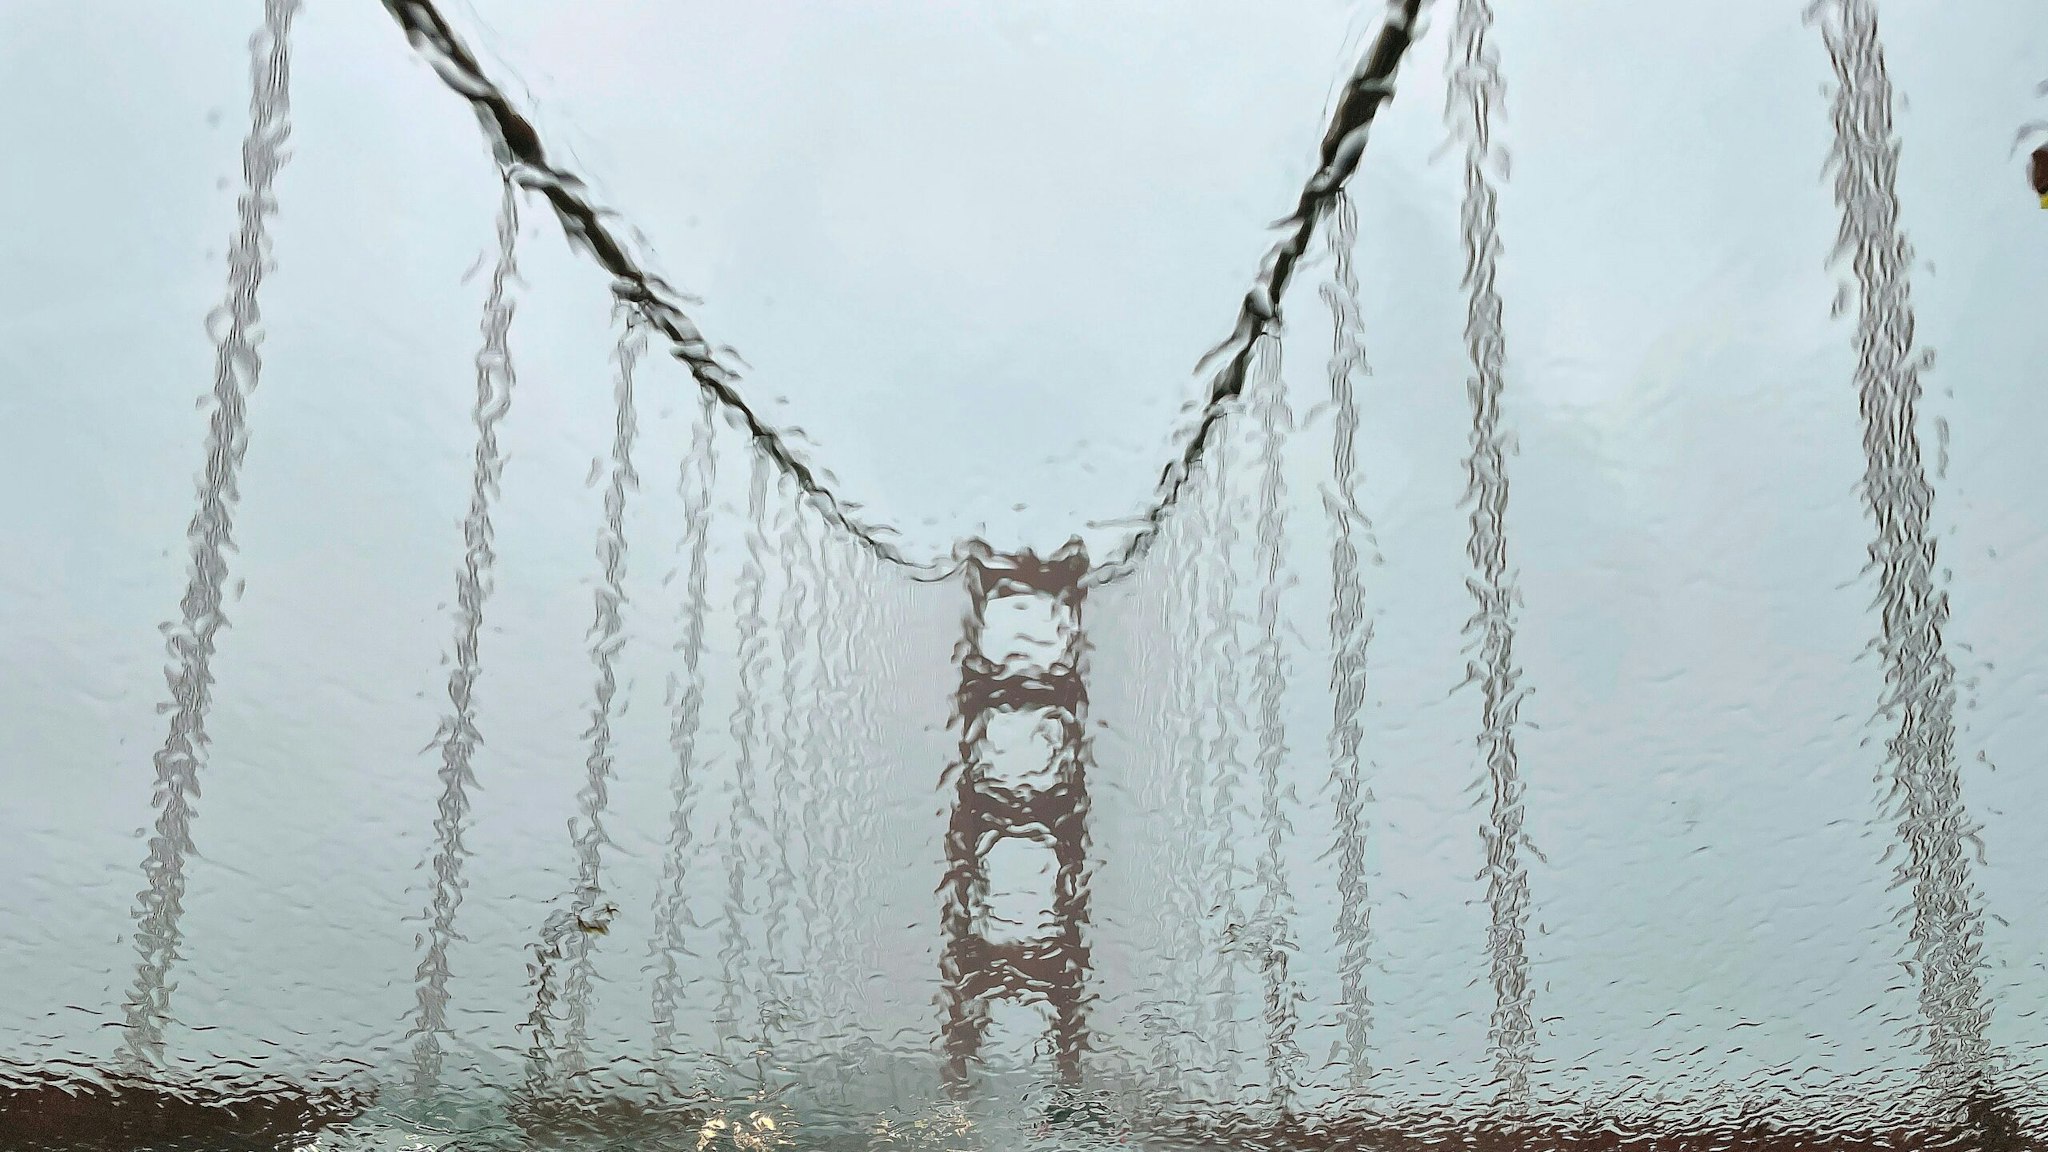 SAN FRANC, CALIFORNIA - JANUARY 04: The Golden Gate Bridge is seen through a rain covered windshield on January 04, 2023 in San Francisco, California. A massive storm is hitting Northern California bringing flooding rains and damaging wind